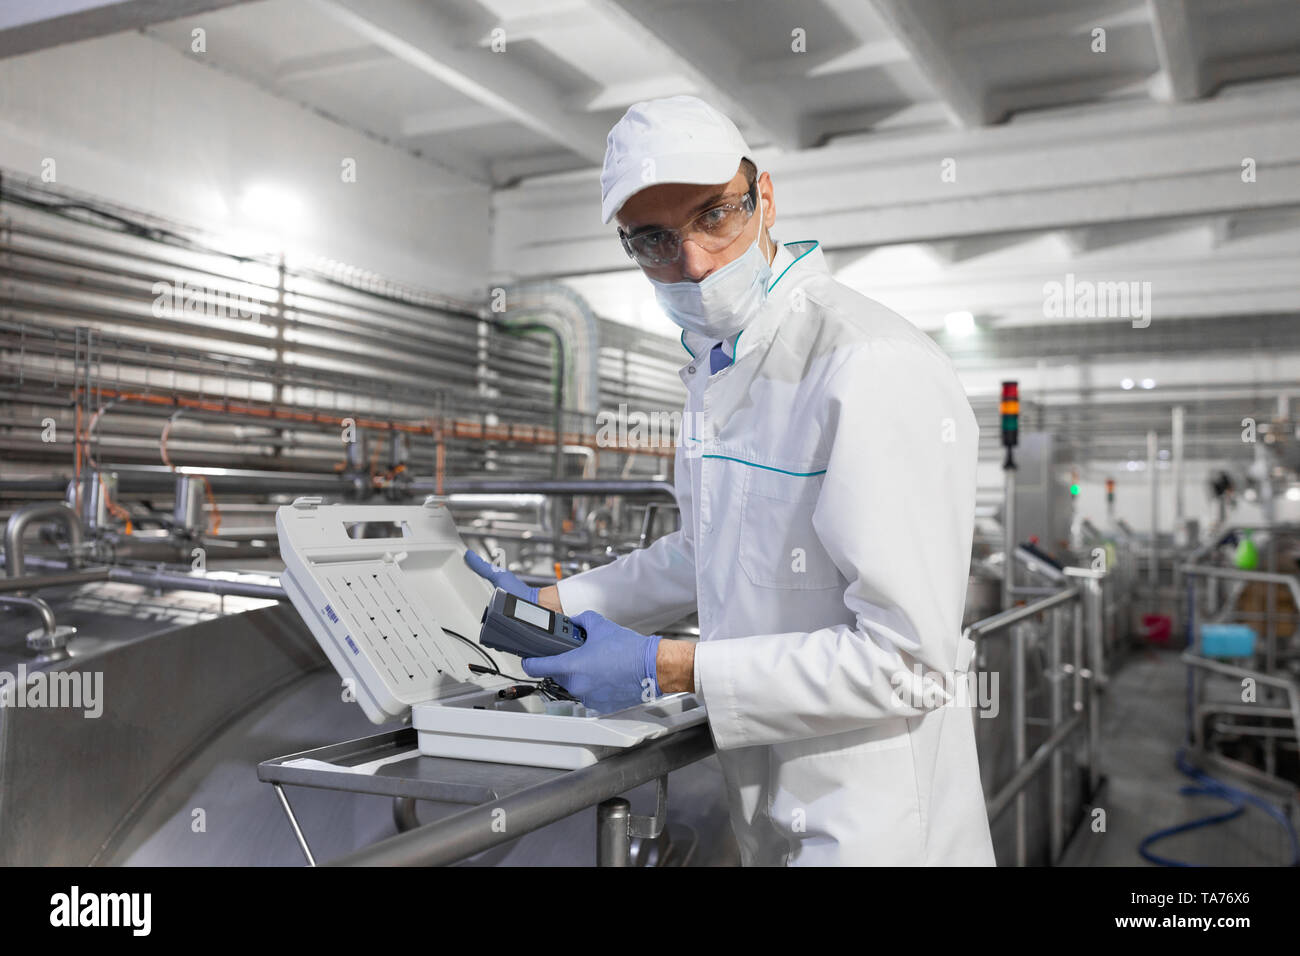 man in a white robe and a cap make a configure of device Stock Photo